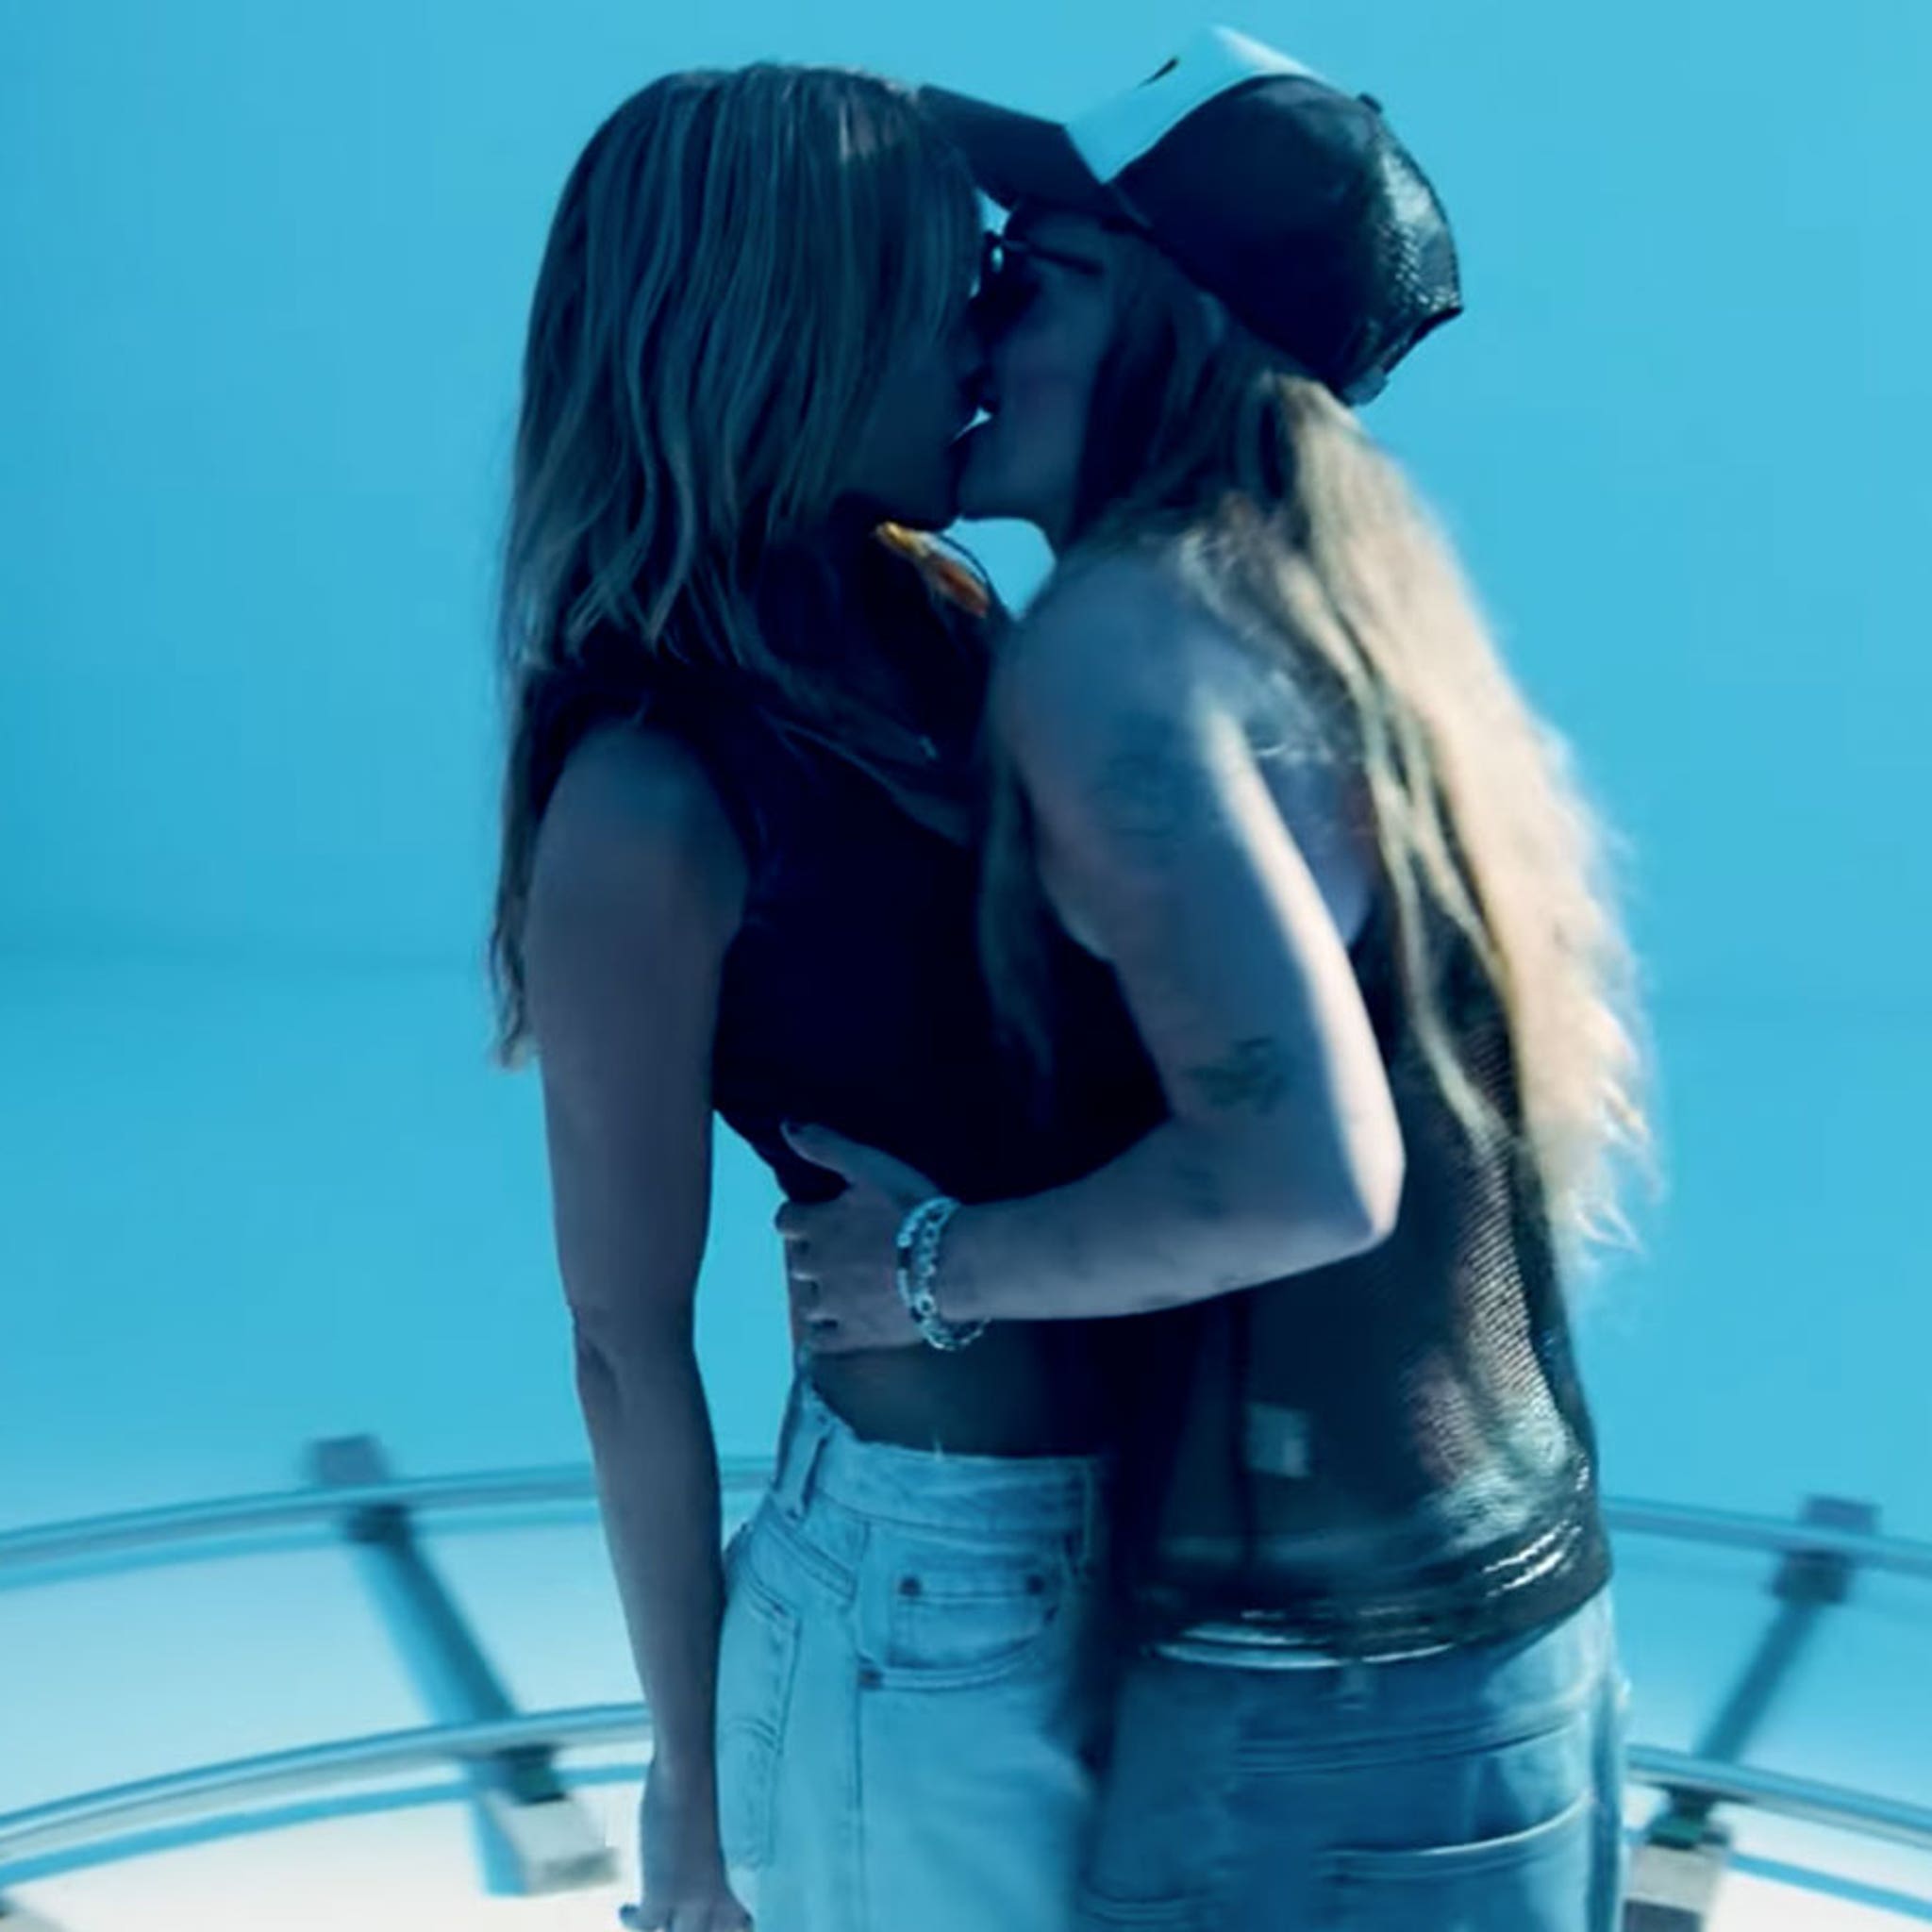 Chrishell Stause and G Flip Hardcore Make Out Session in New Music Video